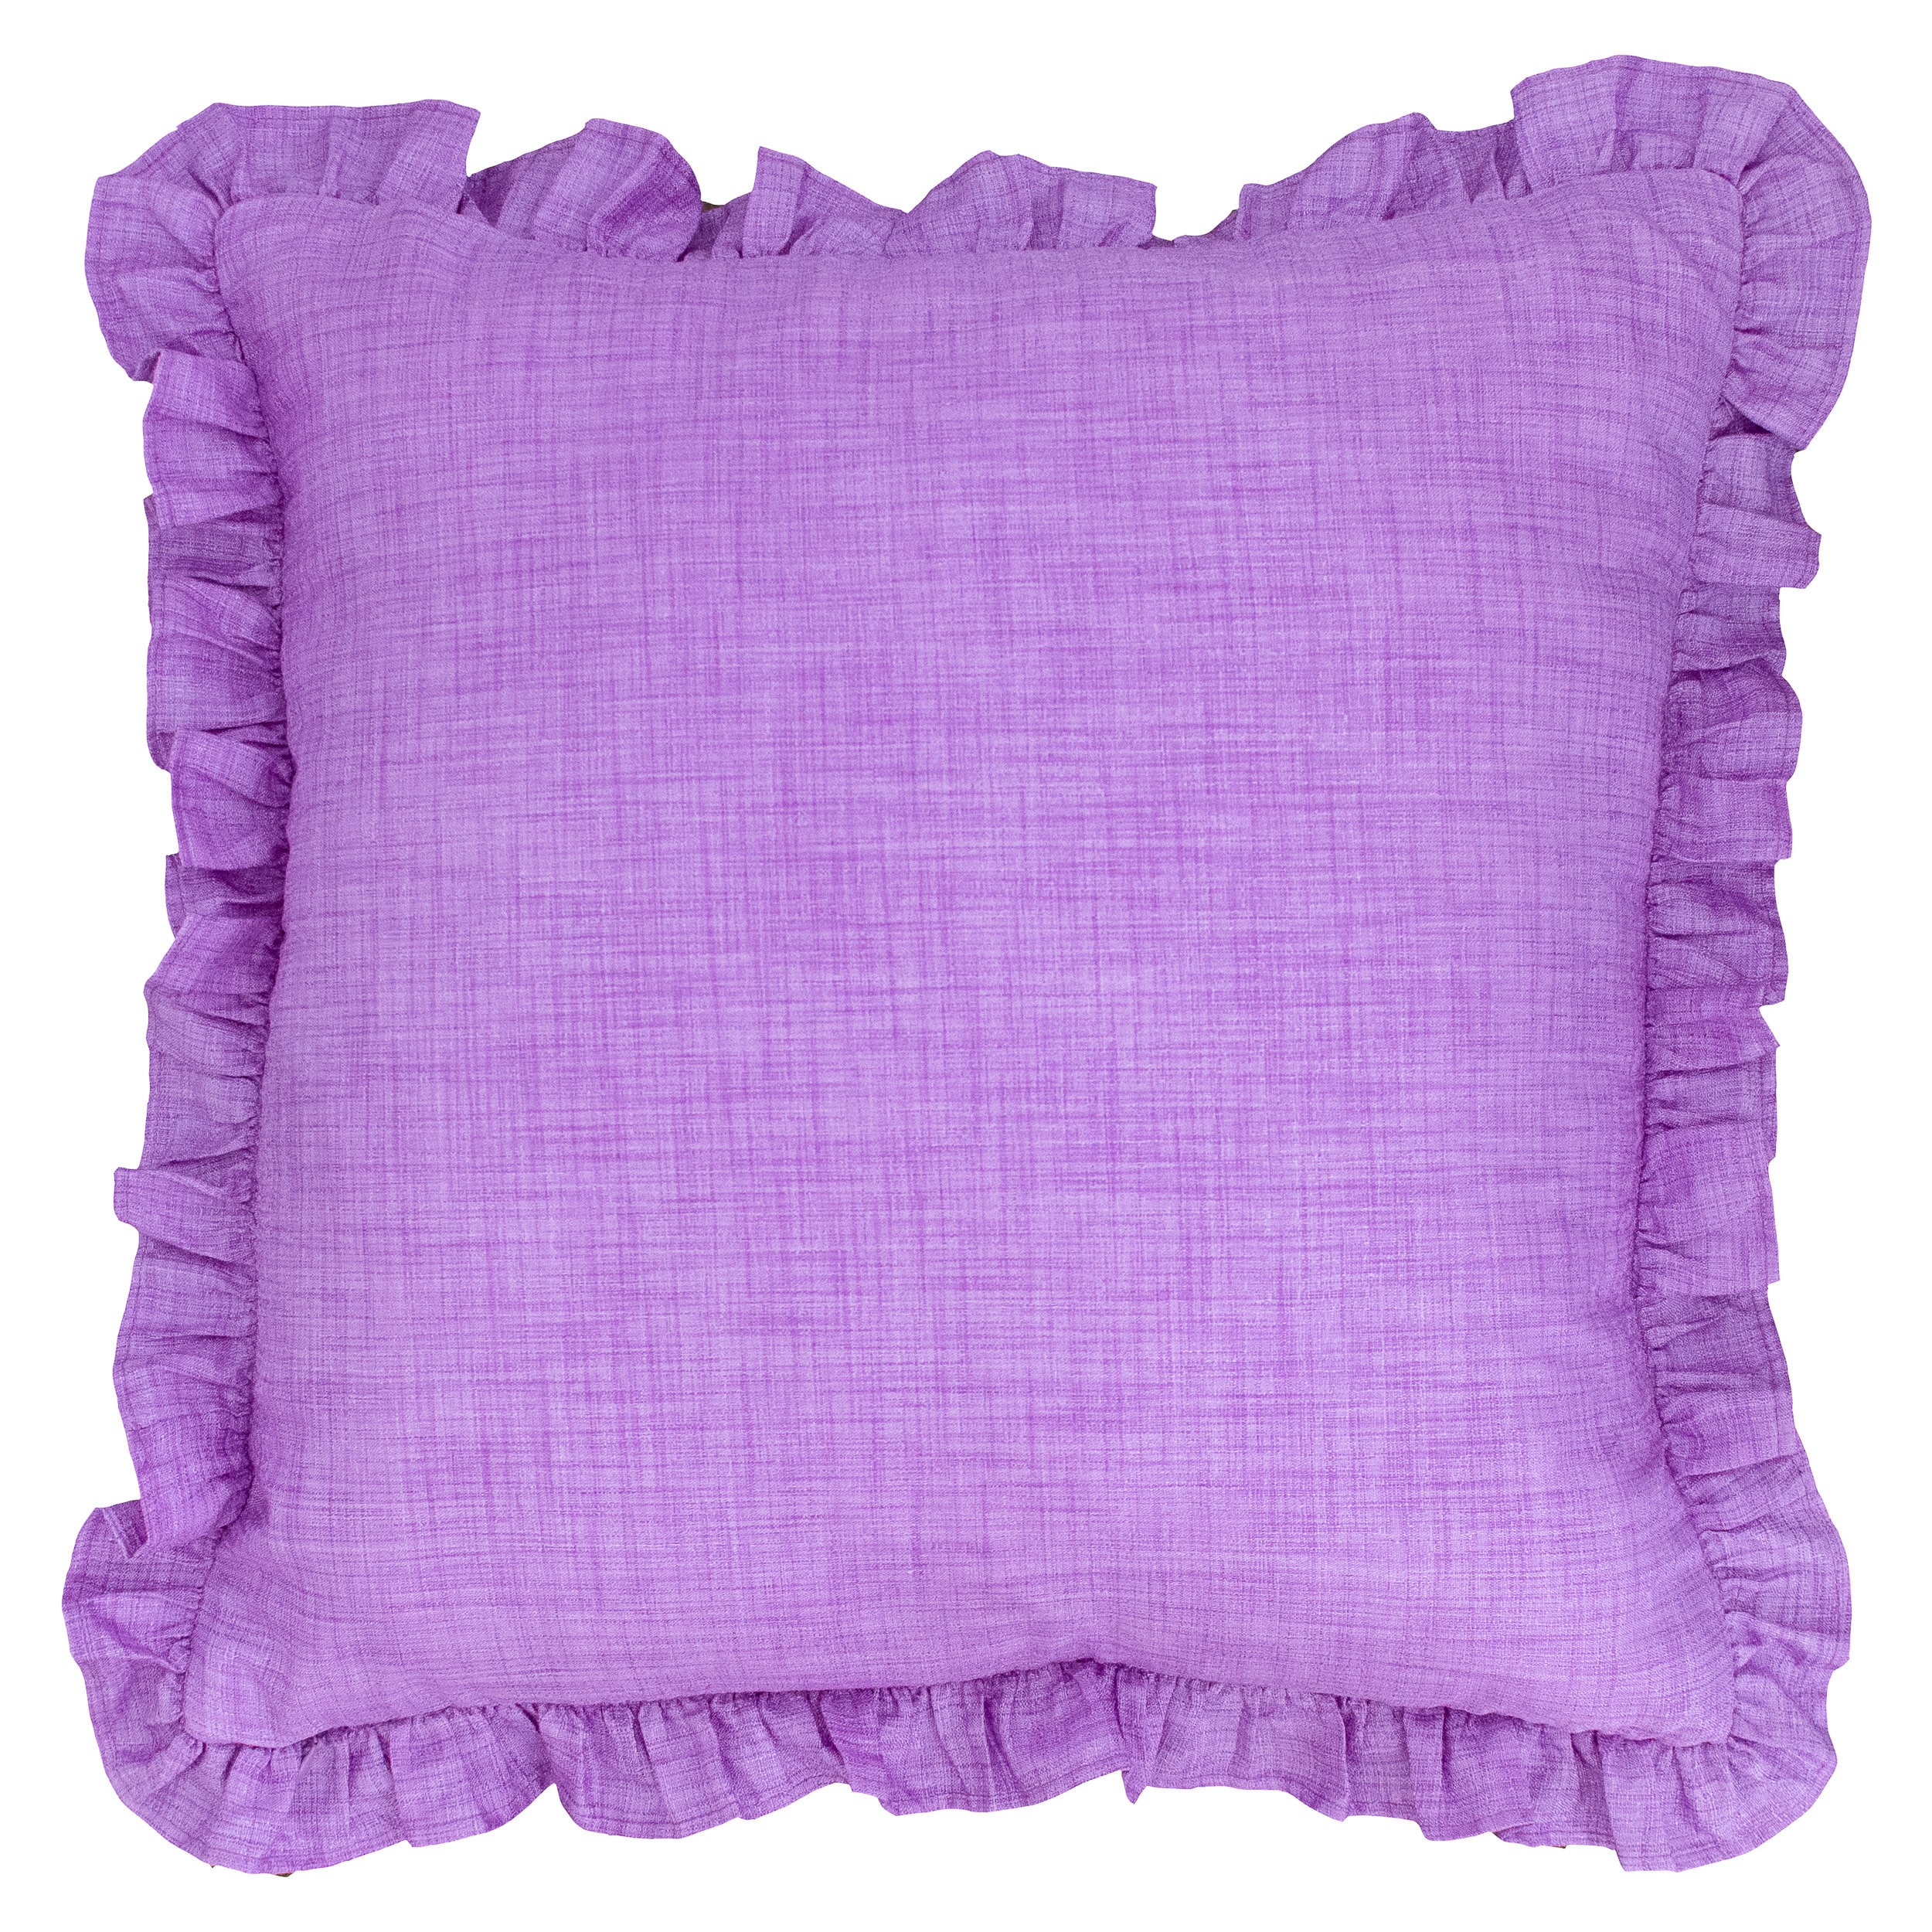 HIG Color Set of 2 Ruffle Throw Pillow Covers with Handmade 3D Petals 20"x 20" 